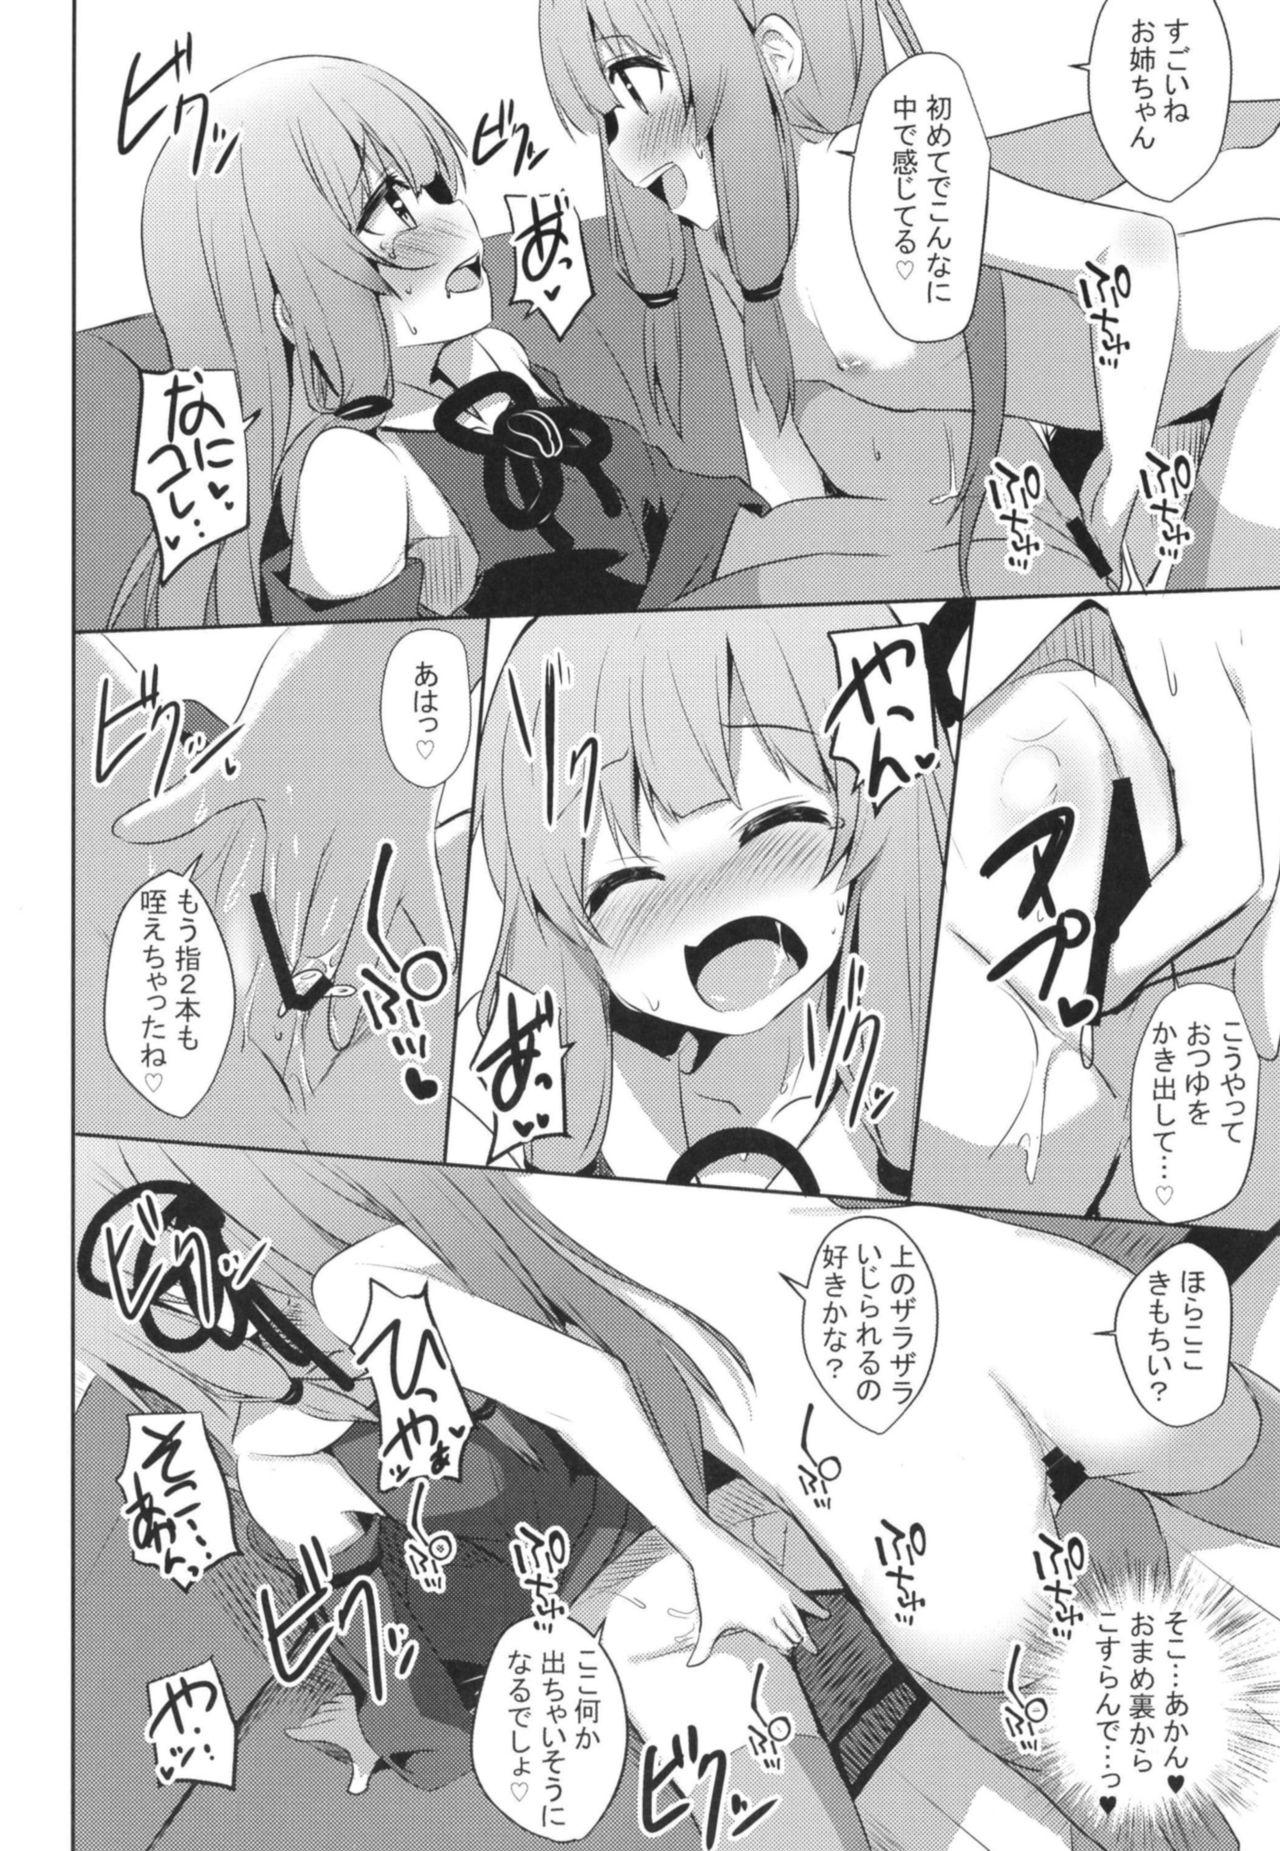 Mexicano [Milk Pudding (Jamcy)] Akane-chan Challenge! 4-kaime (VOICEROID) [Digital] - Voiceroid Vietnamese - Page 7